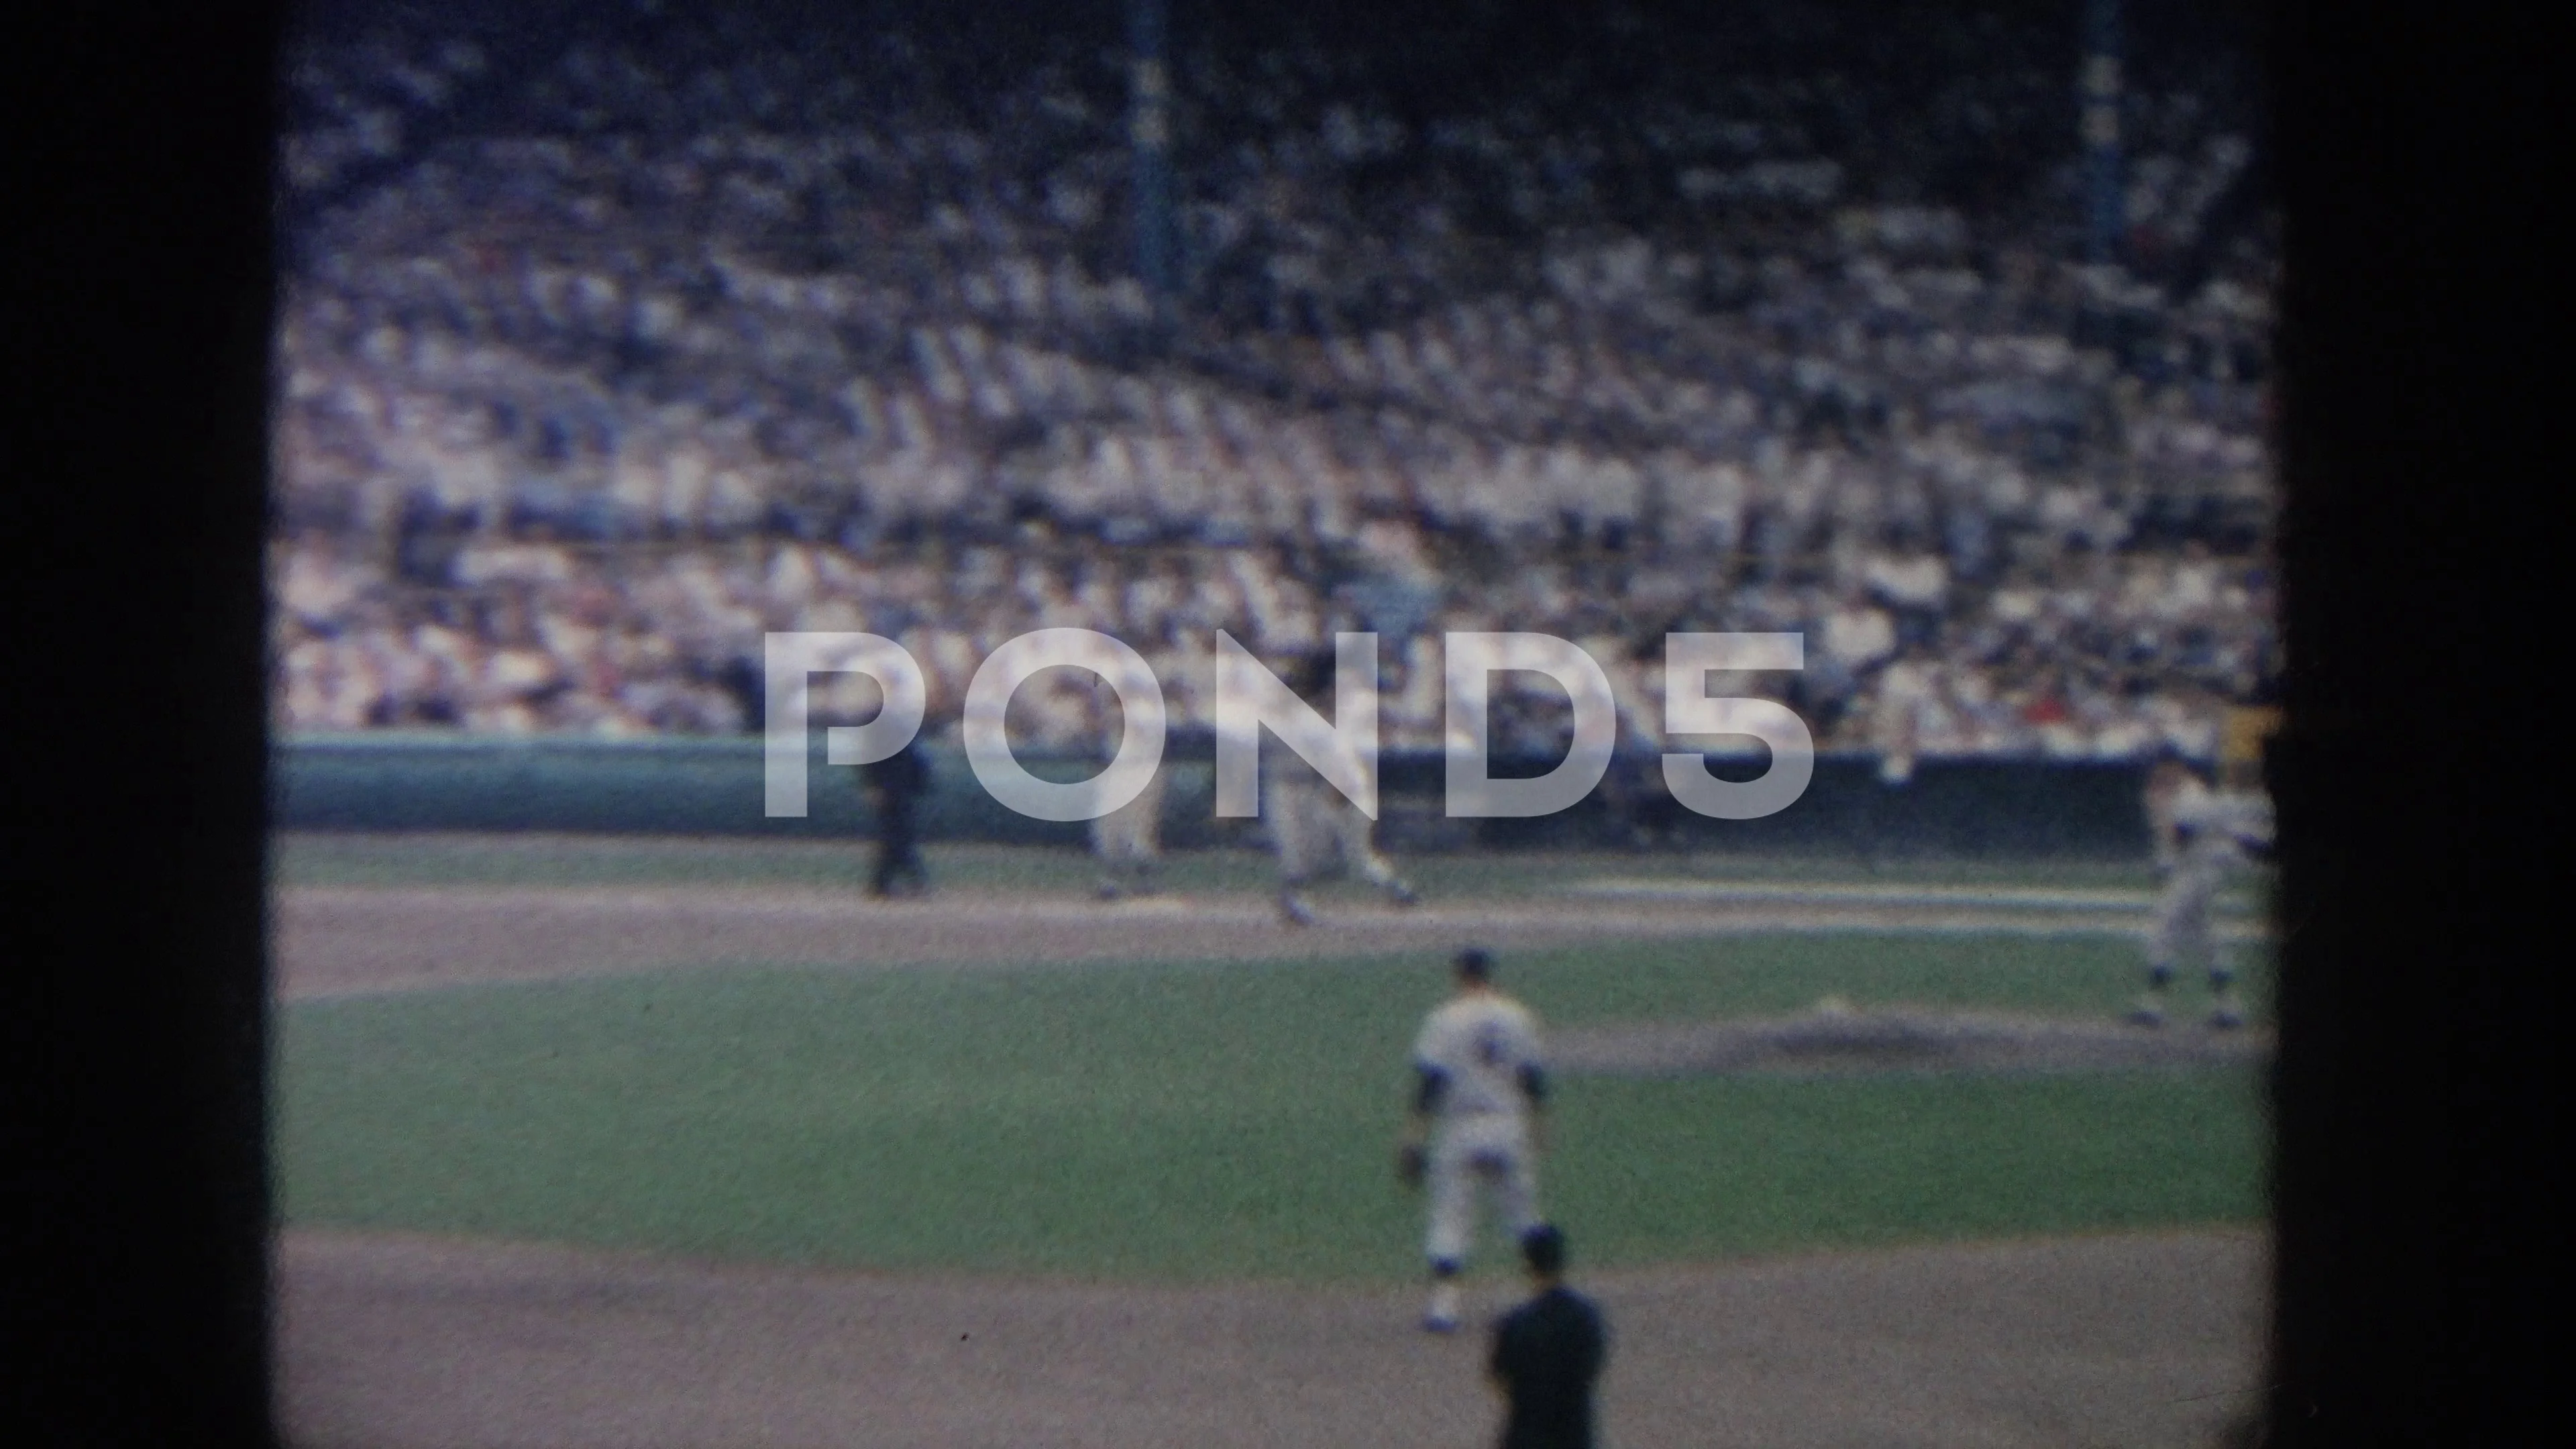 Classic 1959 Scene - Lollar, Lopez, and Fox on the mound in Yankee Stadium.  Lollar was the quie…